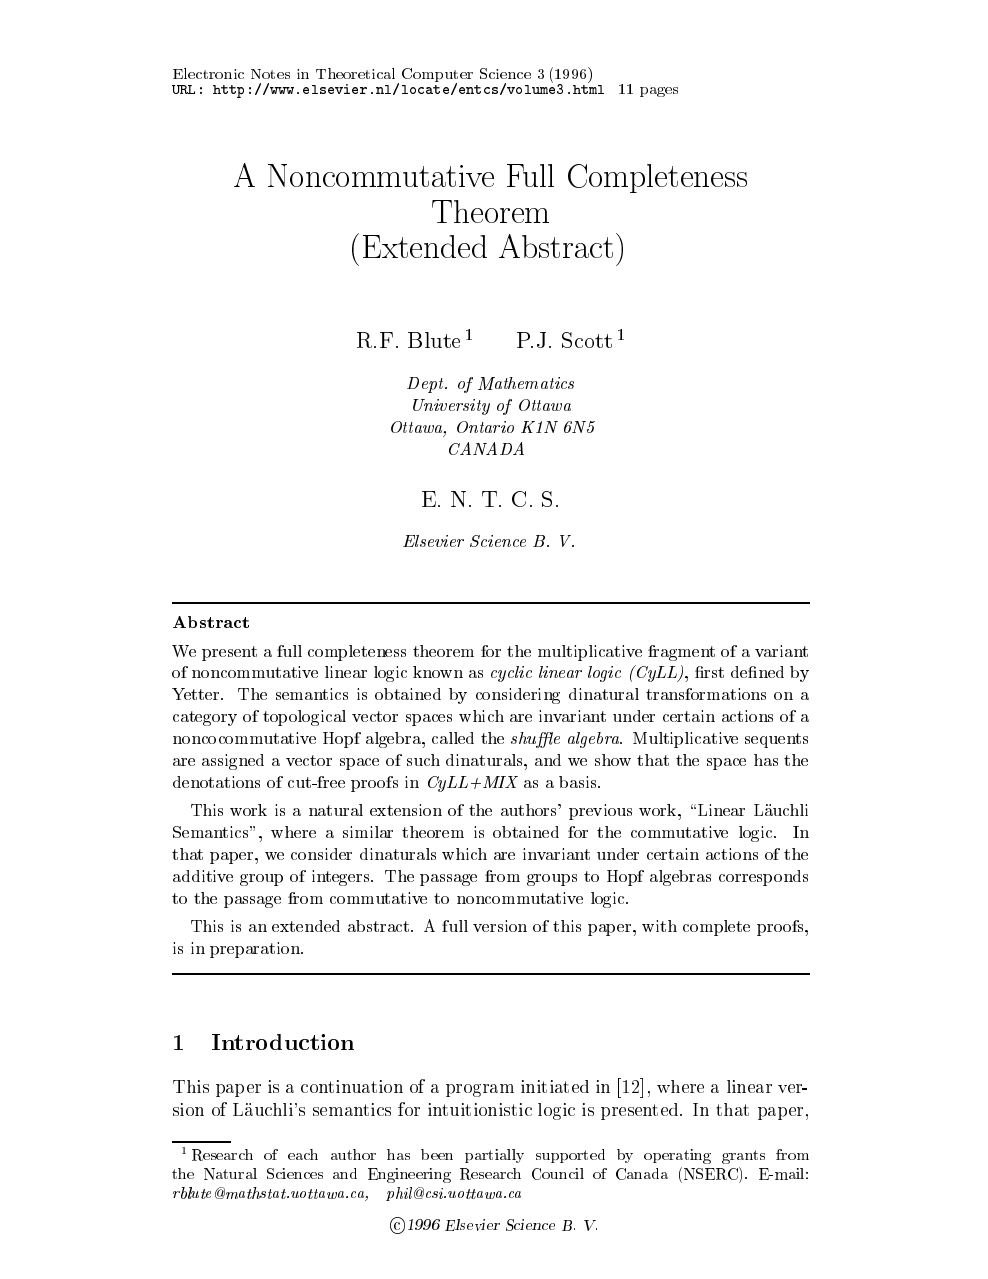 A Noncommutative Full Completeness Theorem Topic Of Research Paper In Mathematics Download Scholarly Article Pdf And Read For Free On Cyberleninka Open Science Hub